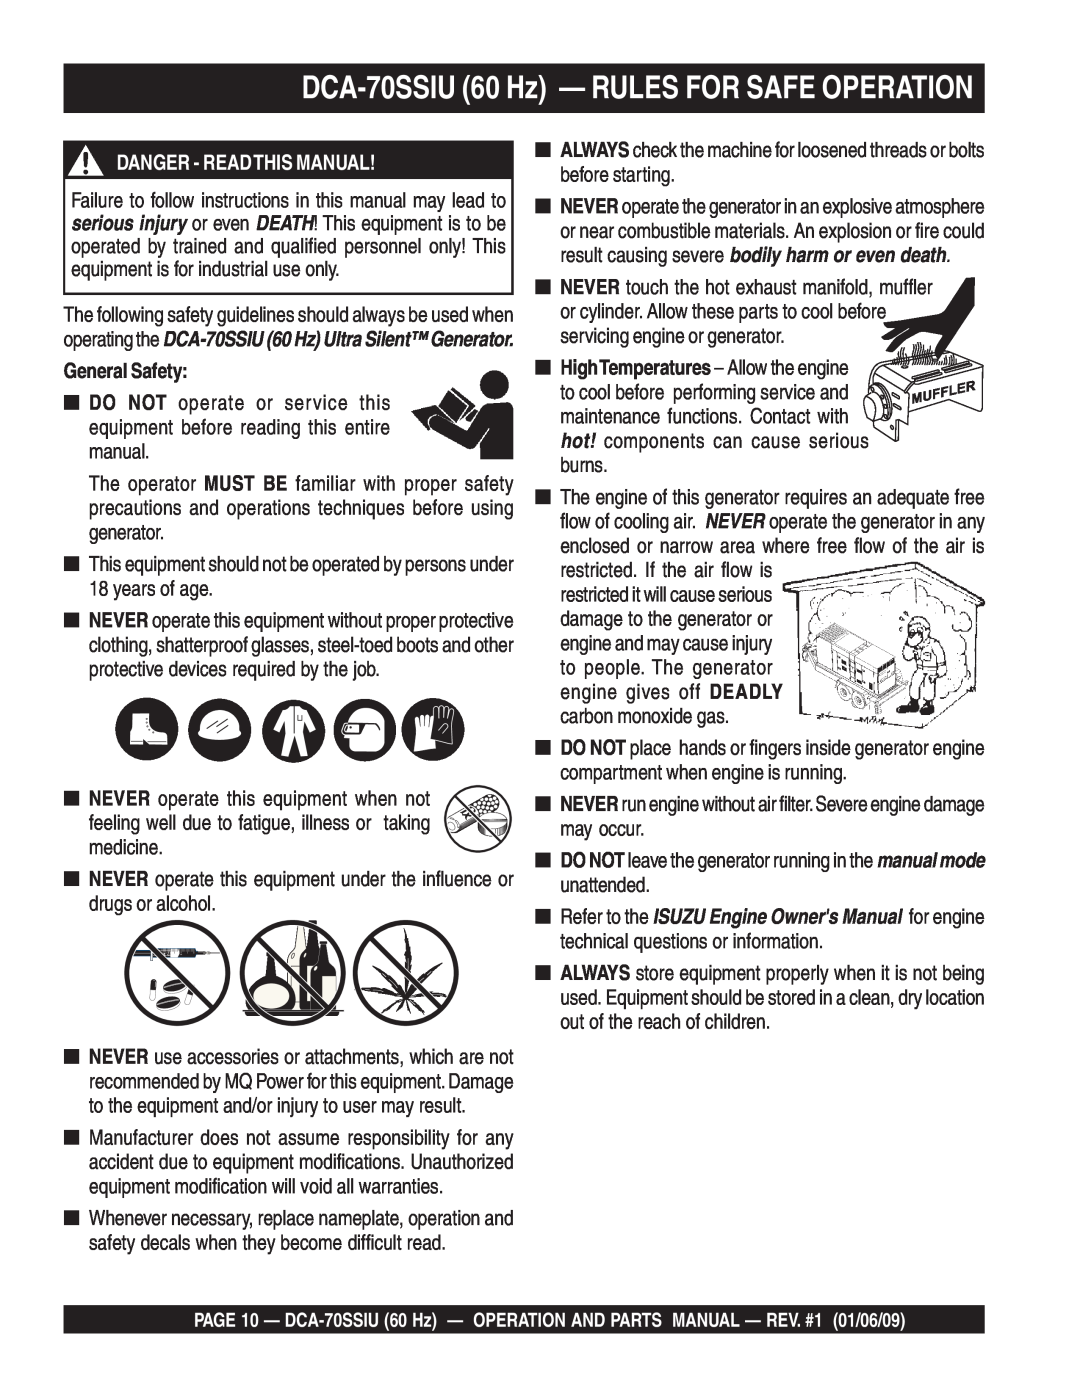 Multiquip M2870300504 DCA-70SSIU 60 Hz - RULES FOR SAFE OPERATION, Danger - Readthis Manual, General Safety 